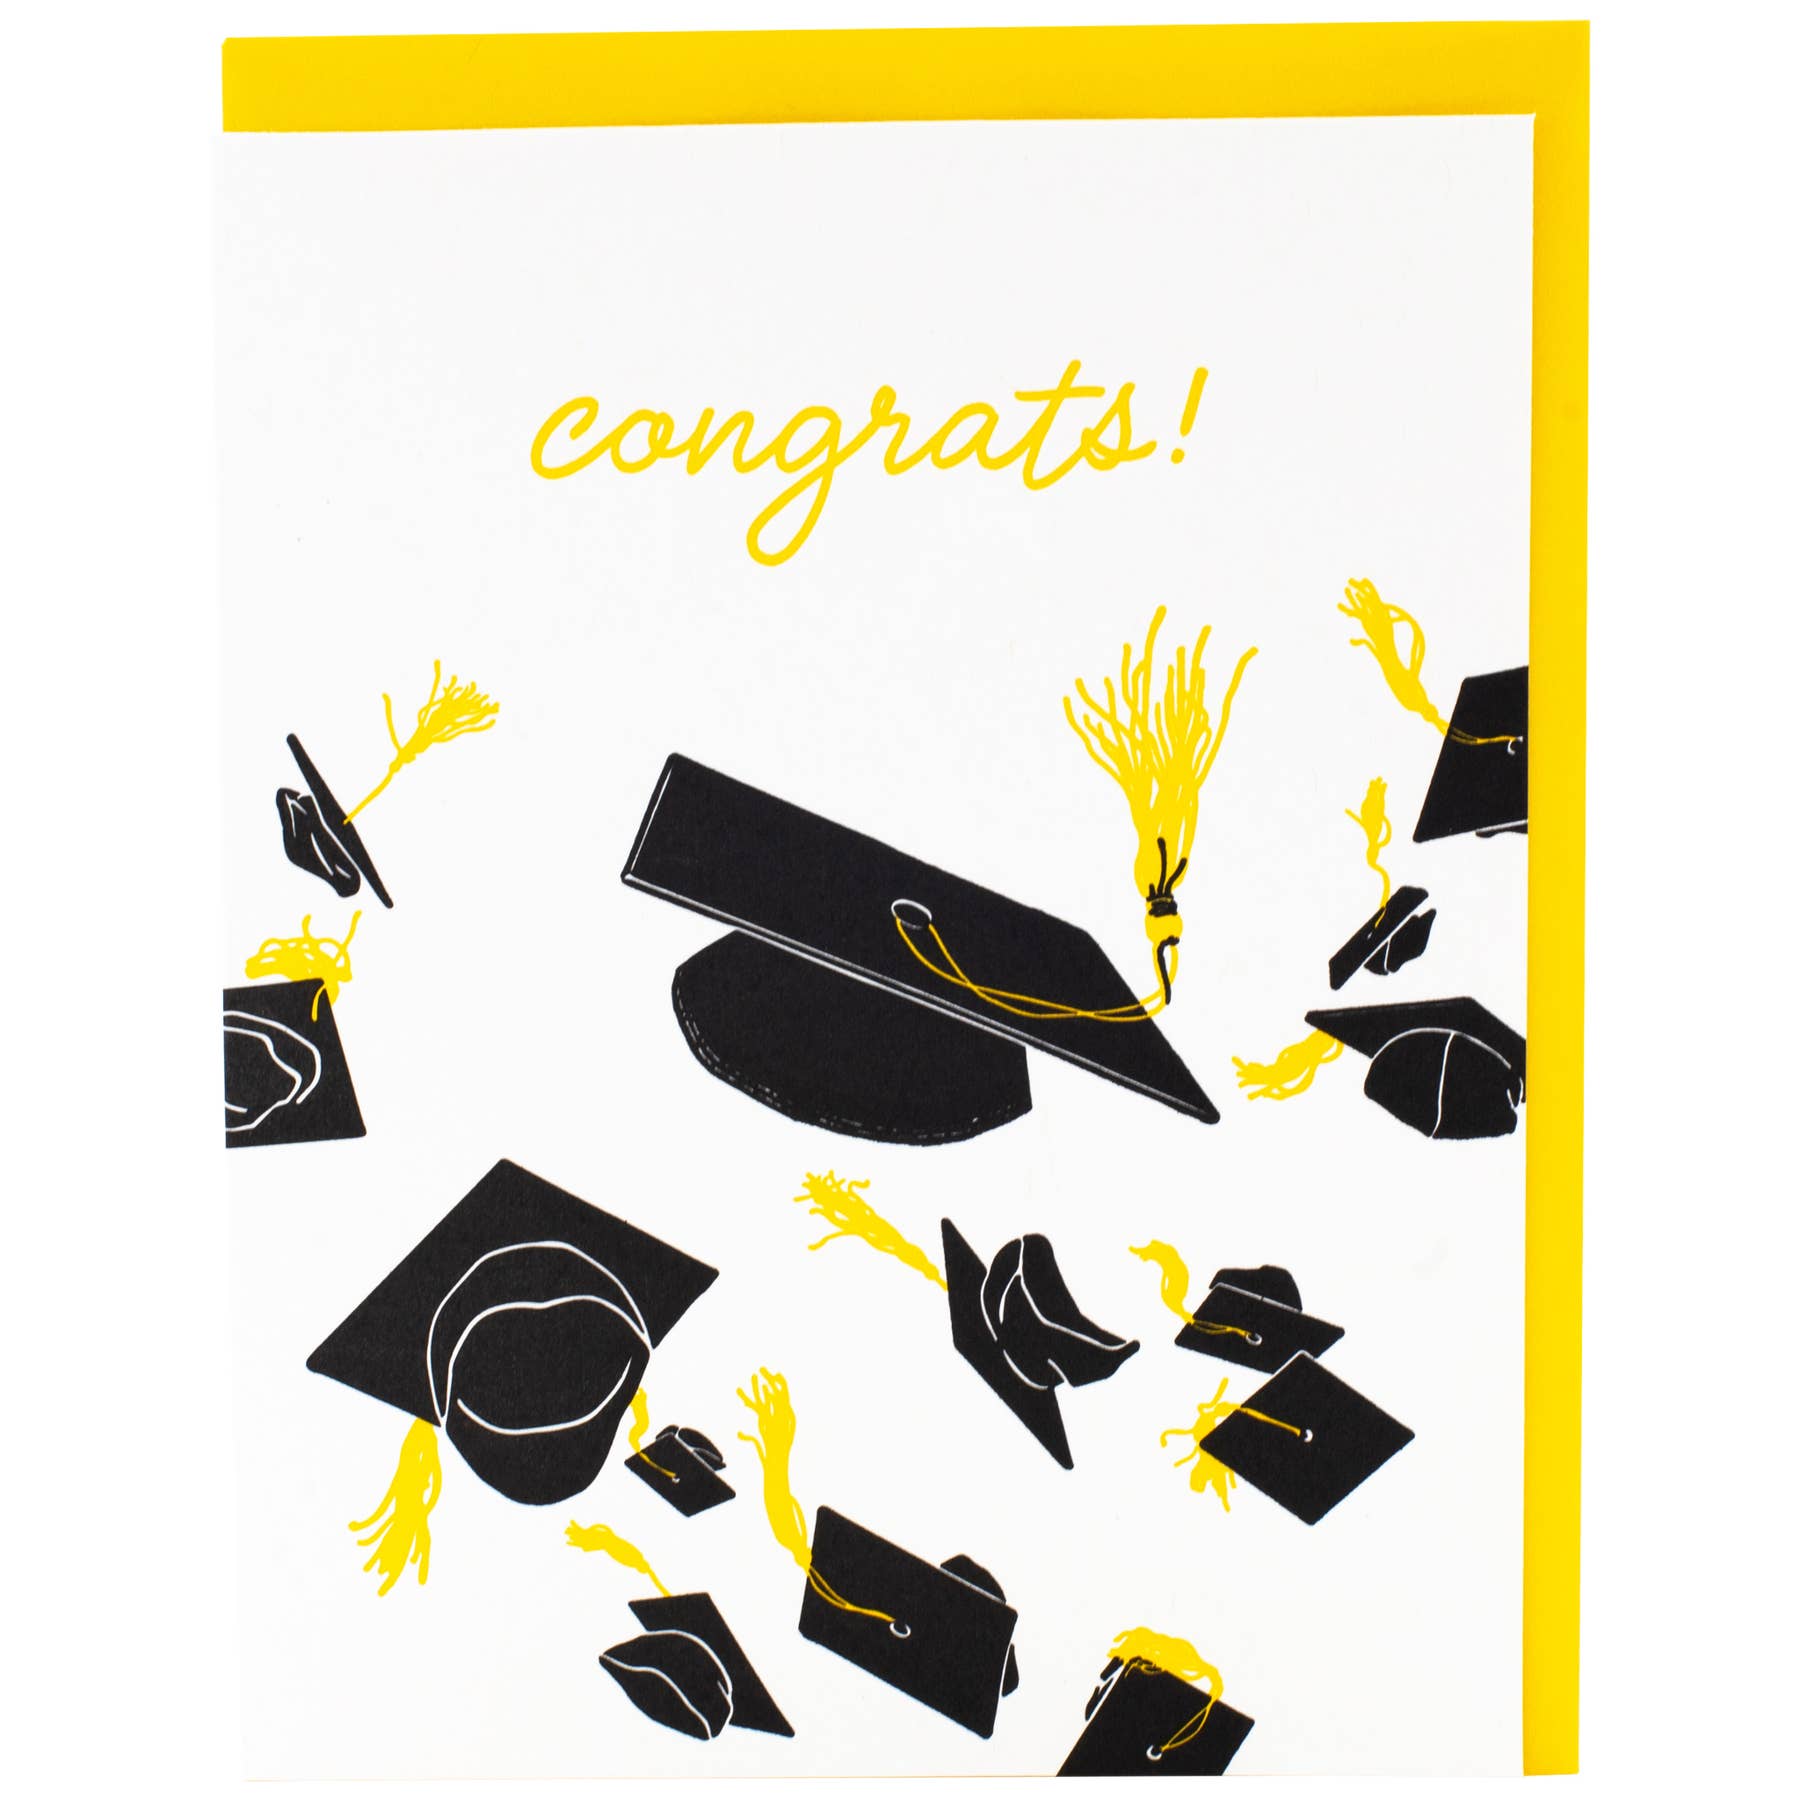 Greeting card with white background and images of black graduation caps with yellow tassels and yellow text says, "Congrats!". Yellow envelope included. 